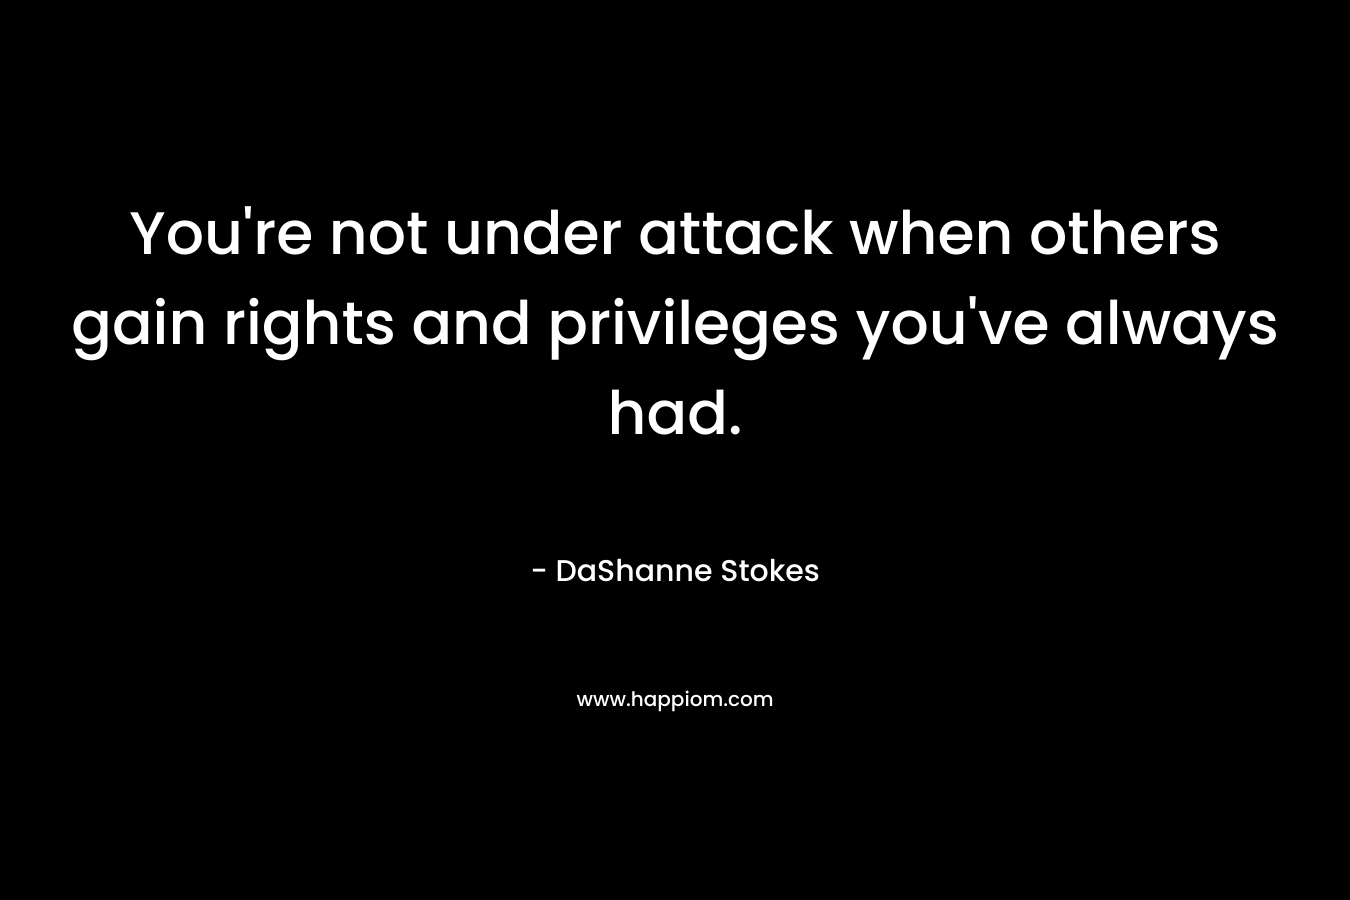 You’re not under attack when others gain rights and privileges you’ve always had. – DaShanne Stokes